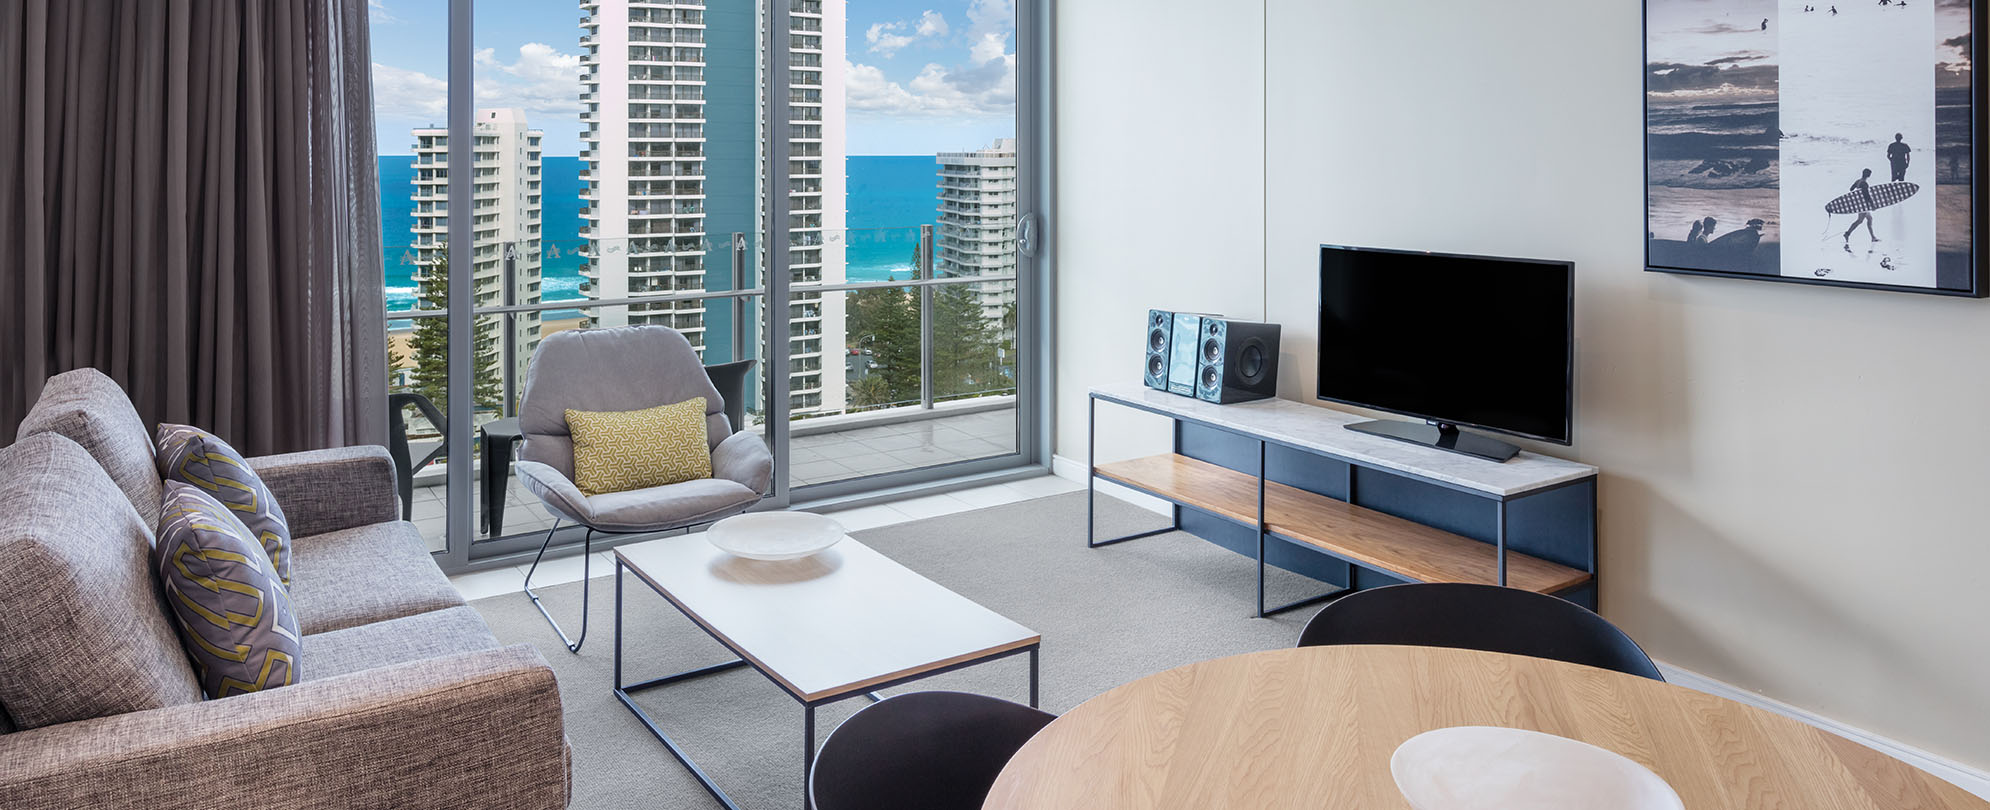 The living room of a 1-bedroom suite at Club Wyndham Surfers Paradise.